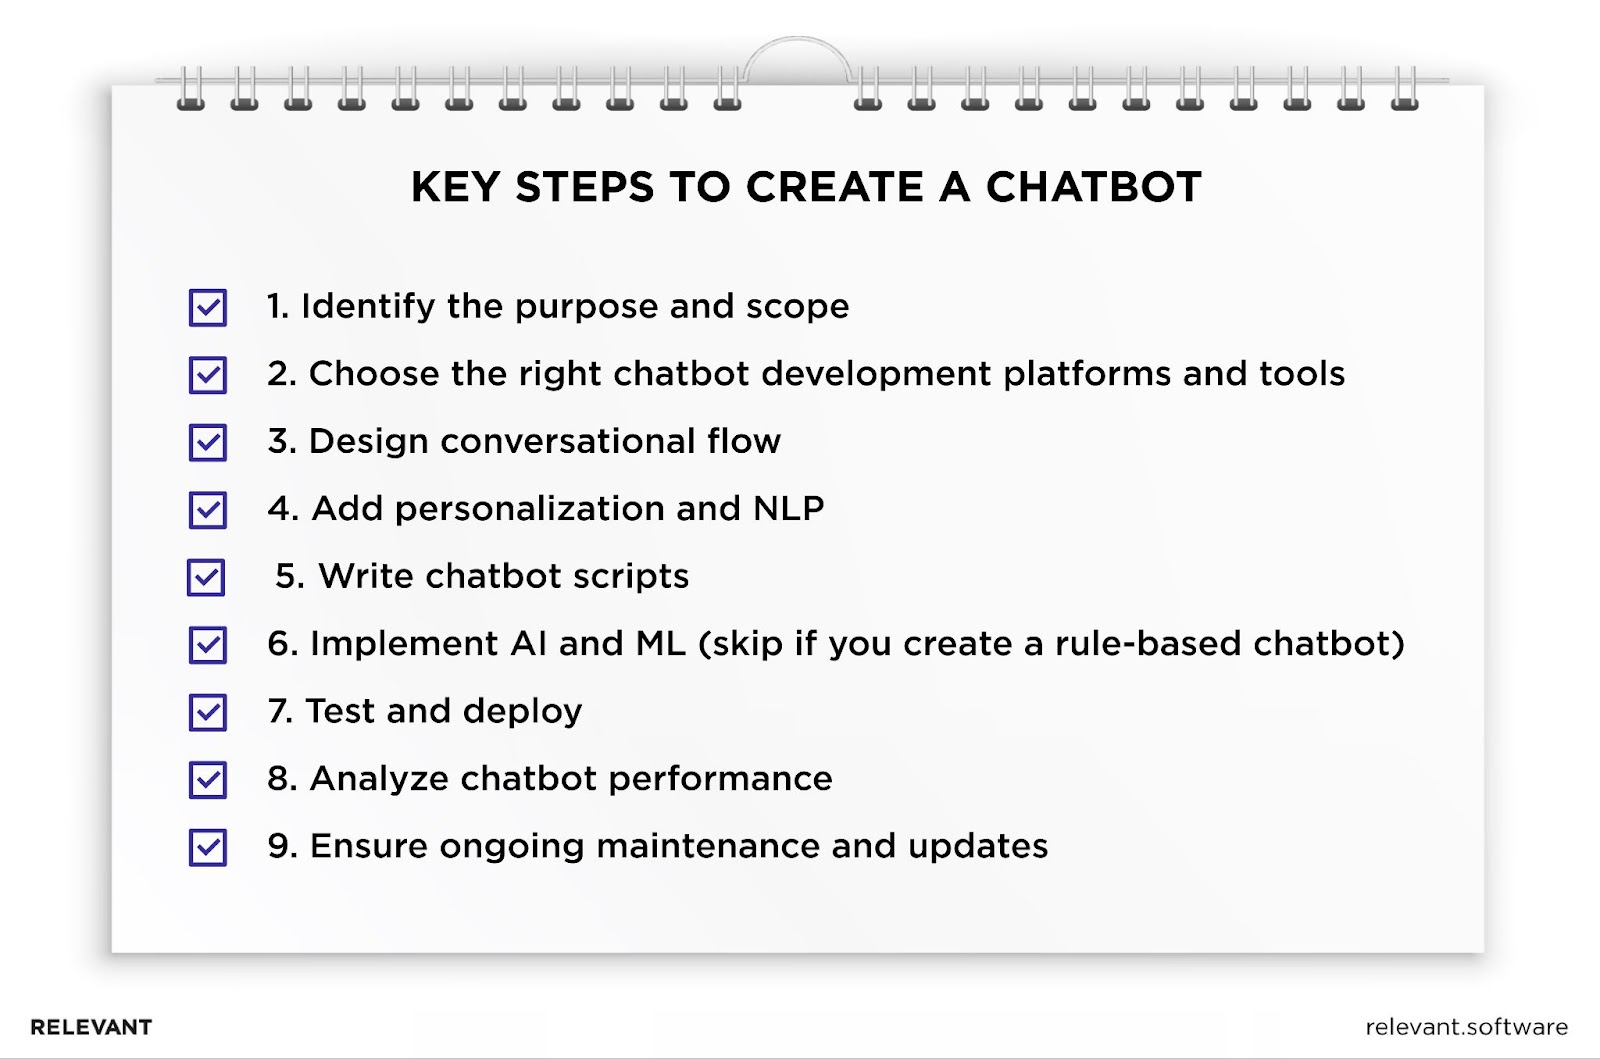 How to Make a Chatbot: Step-by-Step Guide